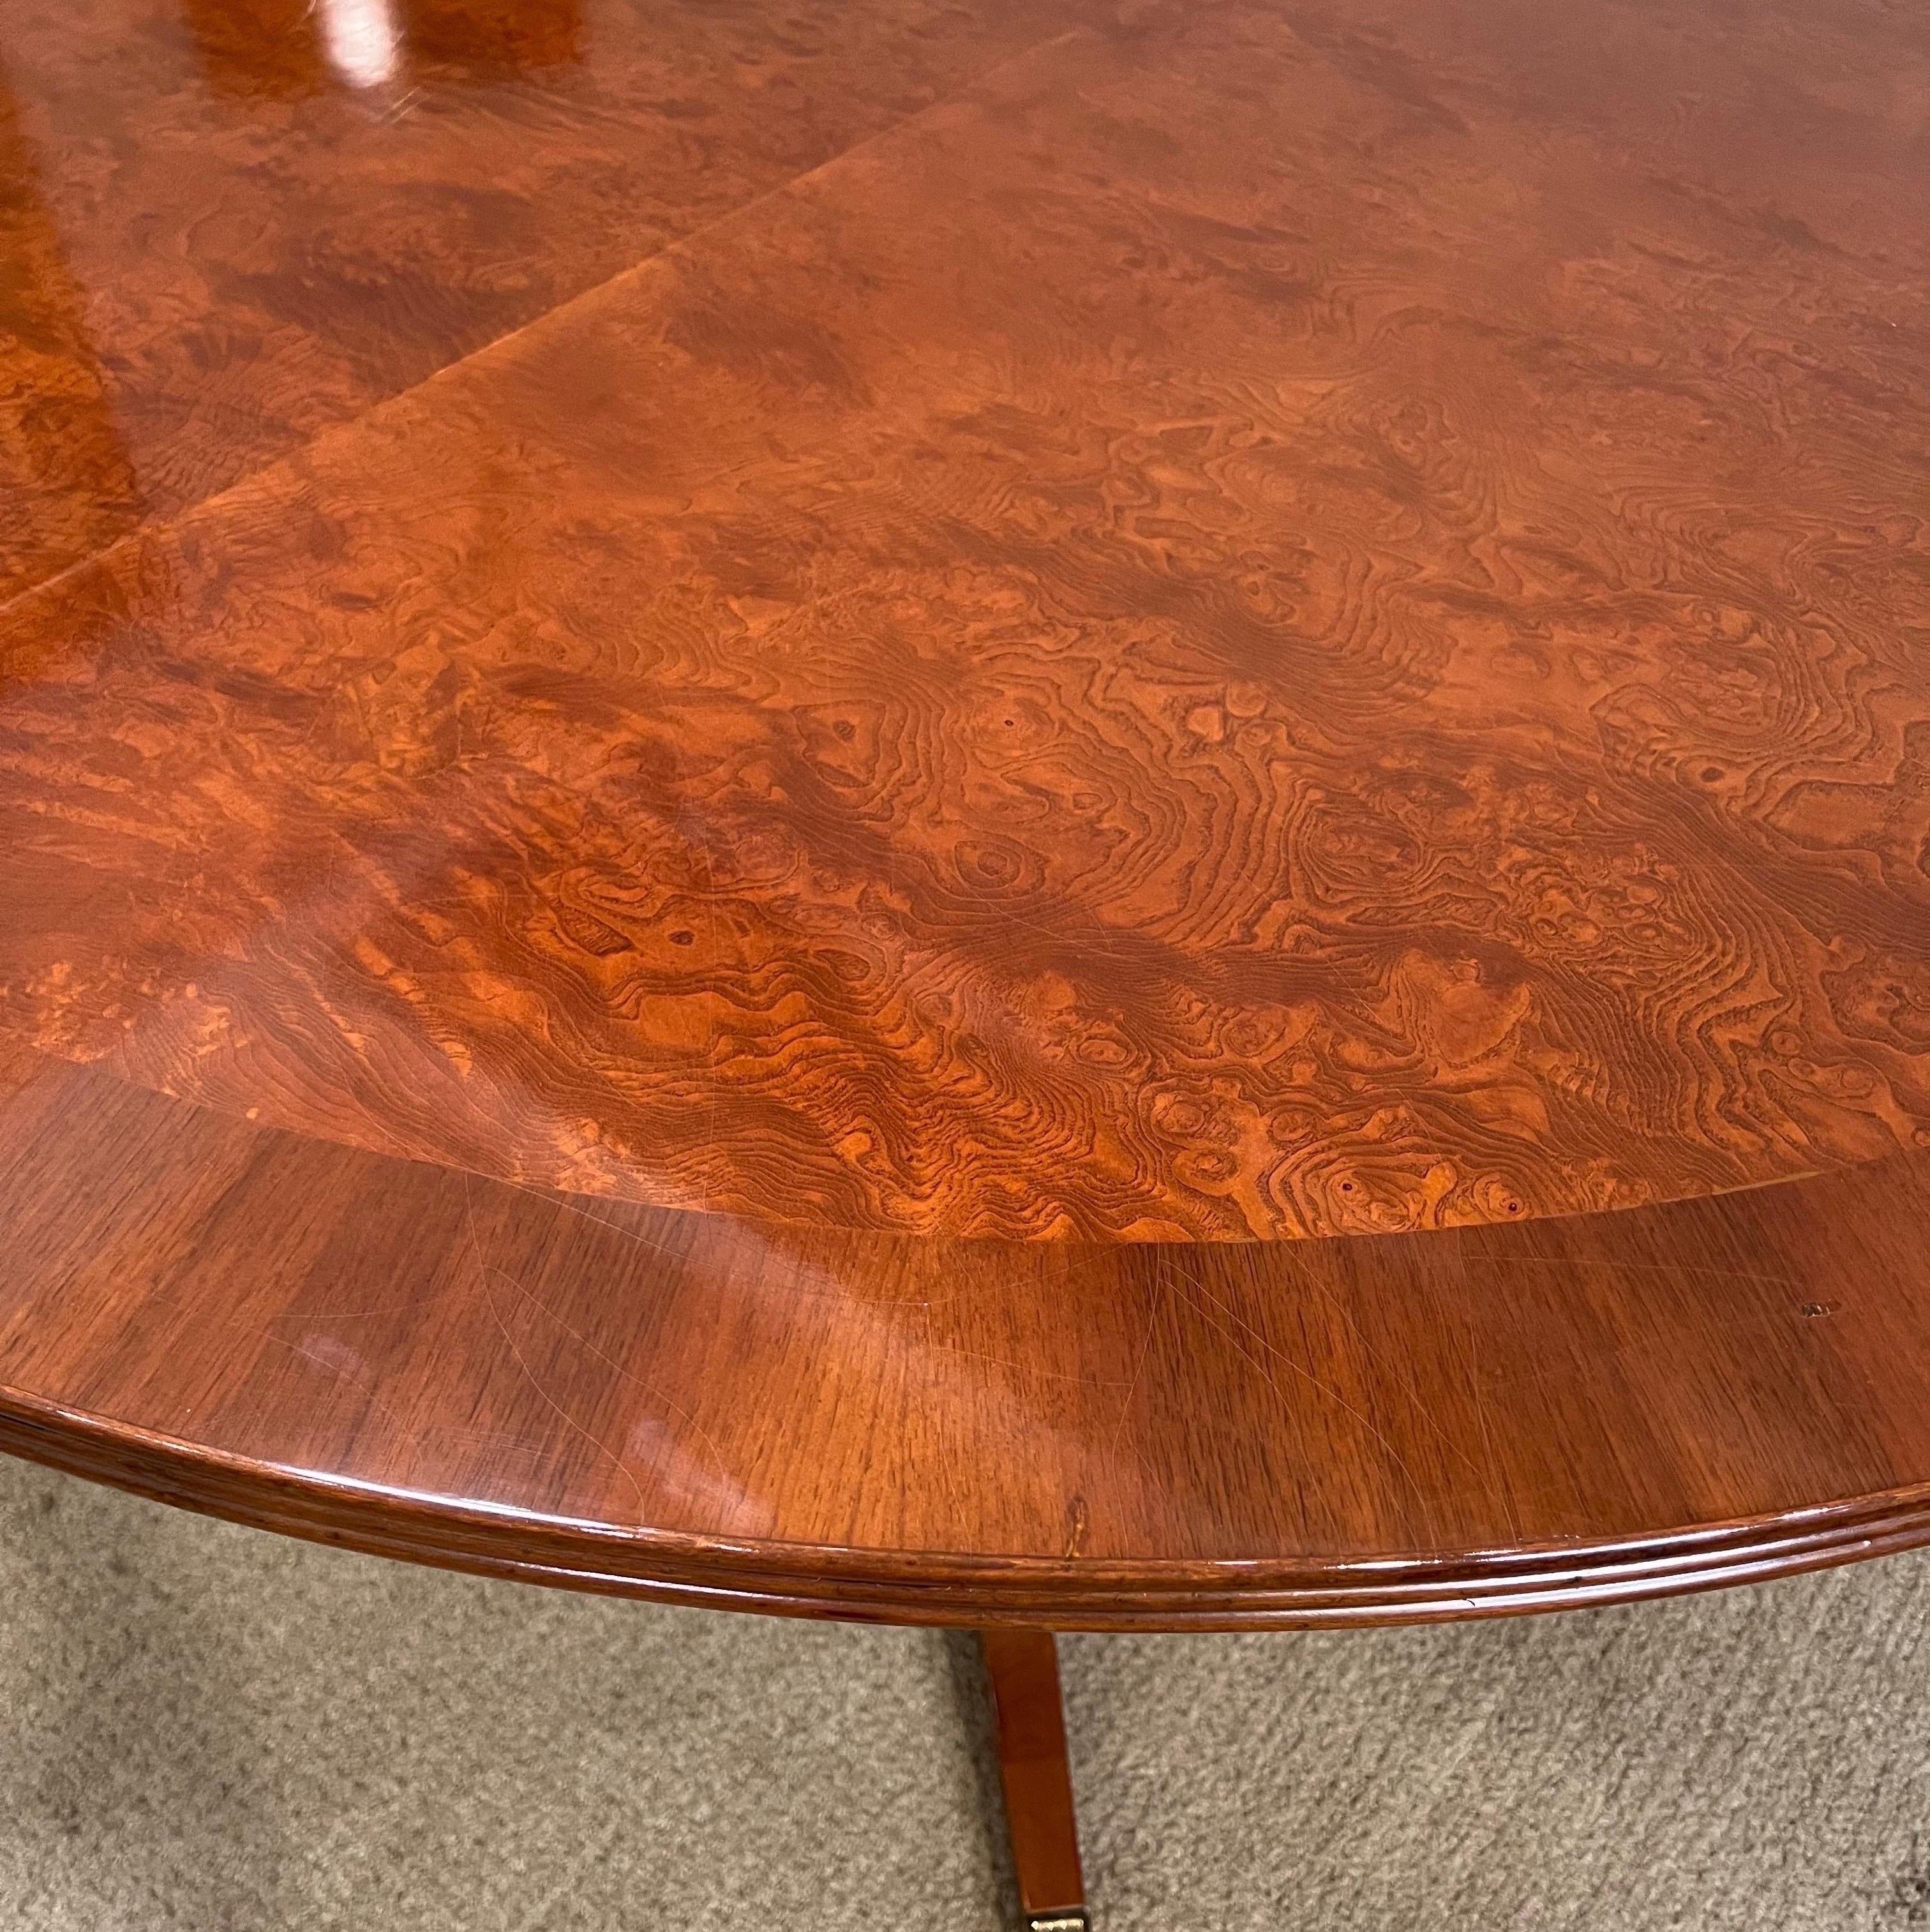 Walnut cross-banded extension dining table with 
1 leaf on a single quadruped base. It’s original finish in good condition with underlying craquelure effect to the finish.